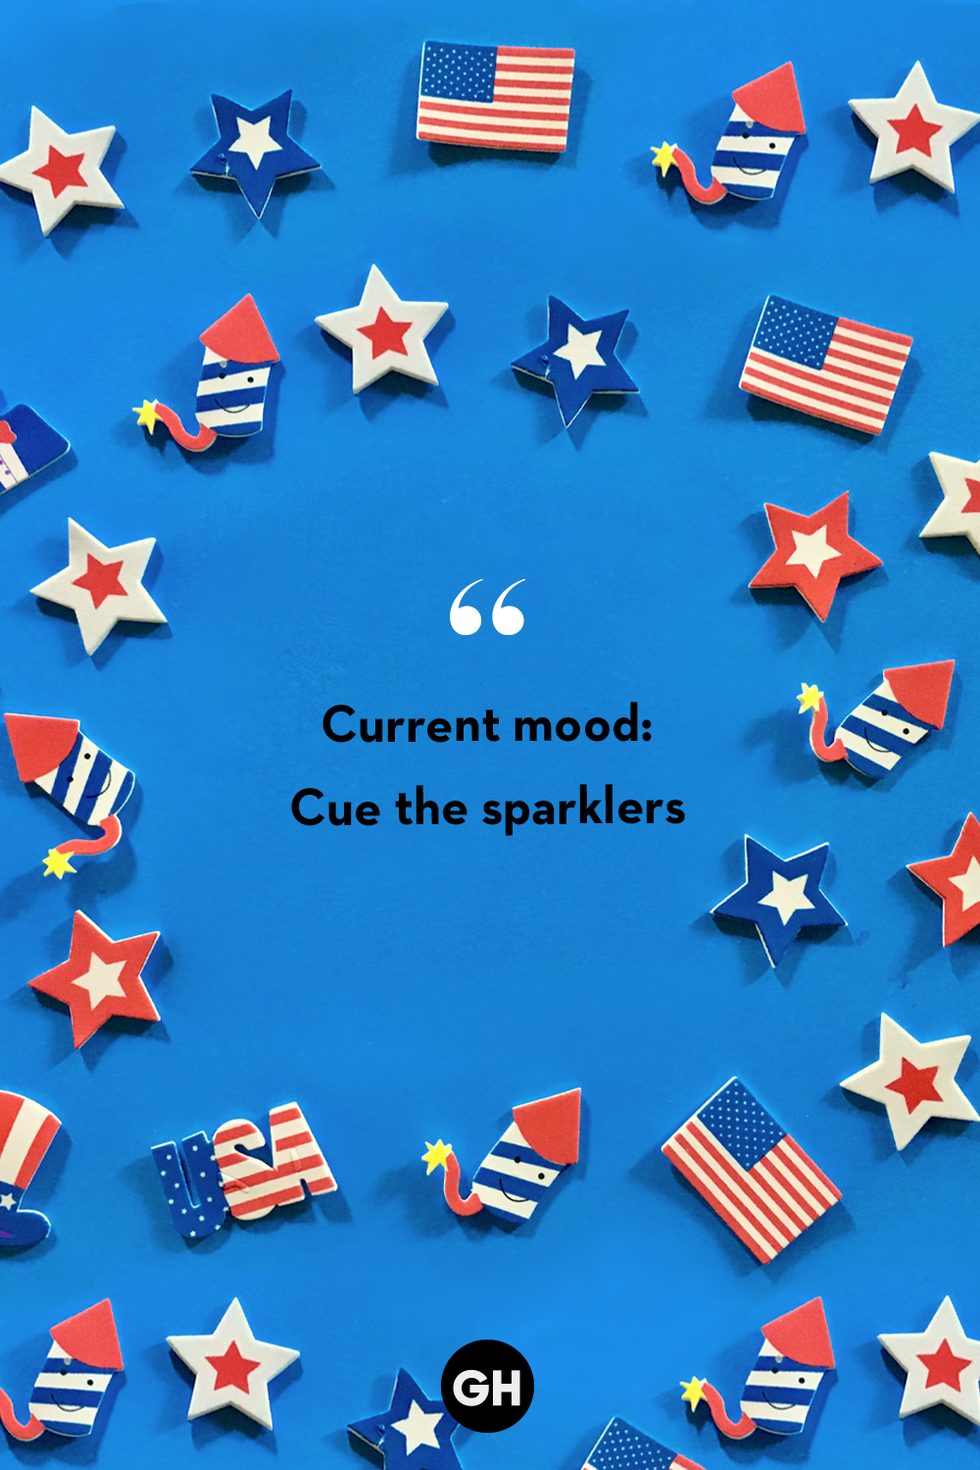 black text on royal blue background with red white and blue stars, flags and fireworks reading current mood cue the sparklers